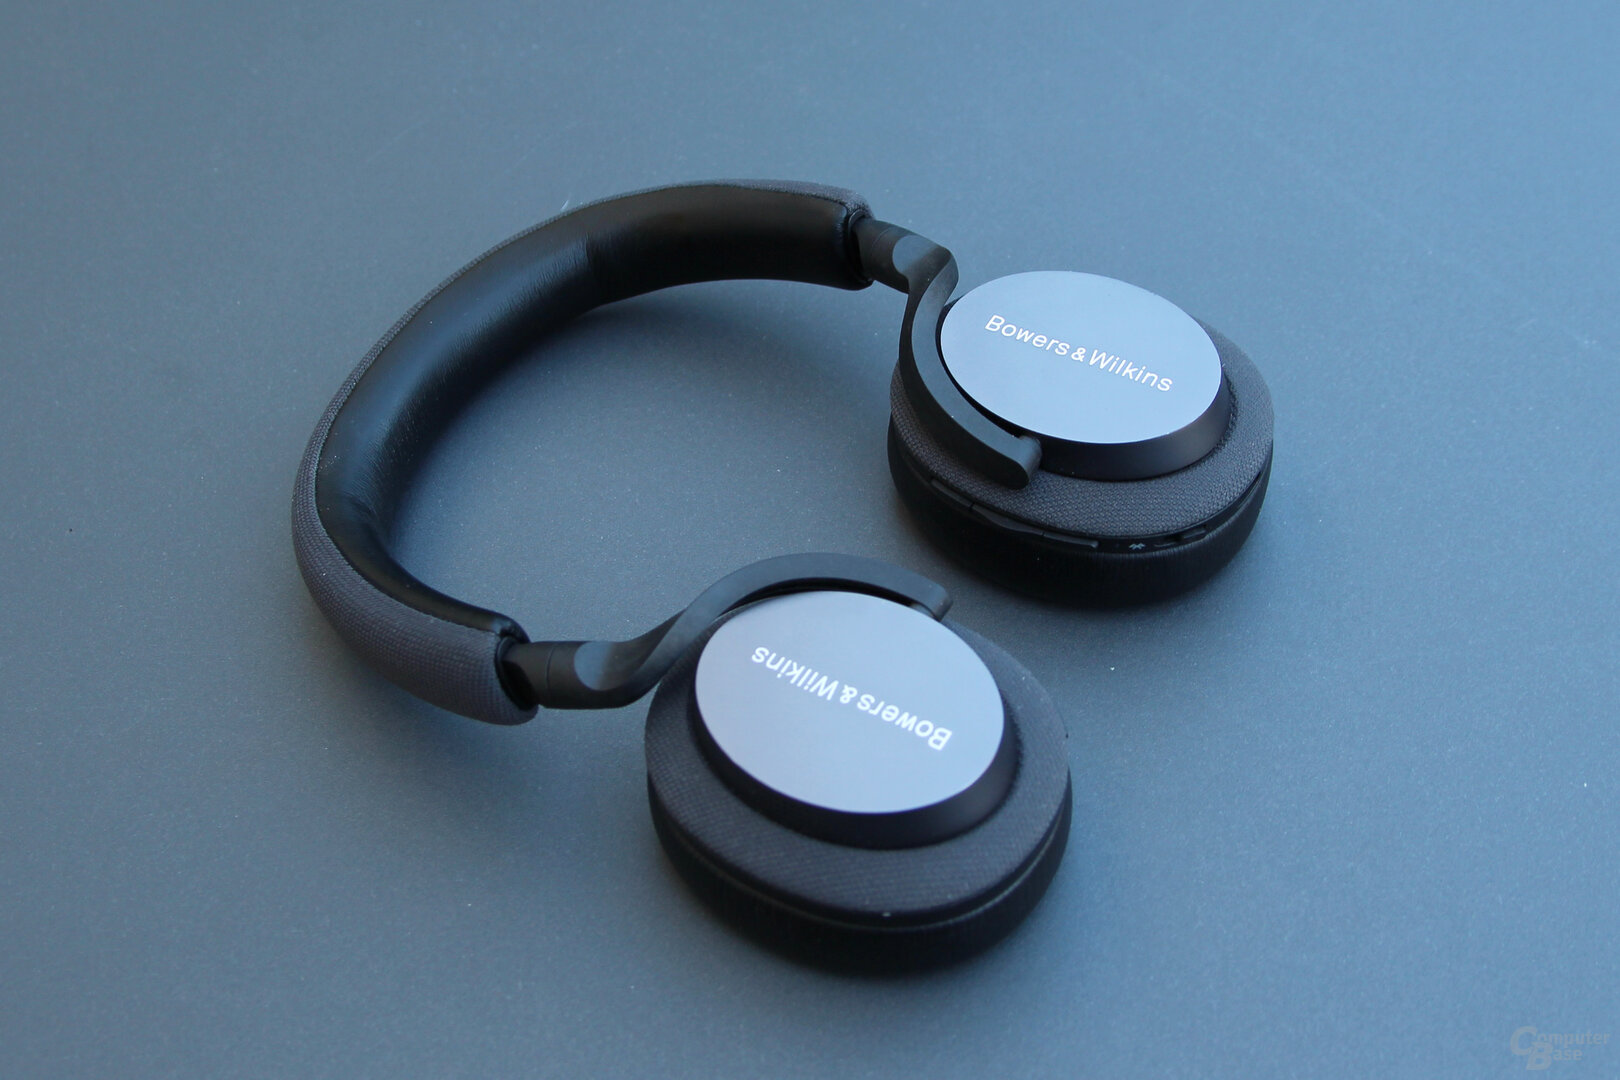 Bowers & Wilkins PX5